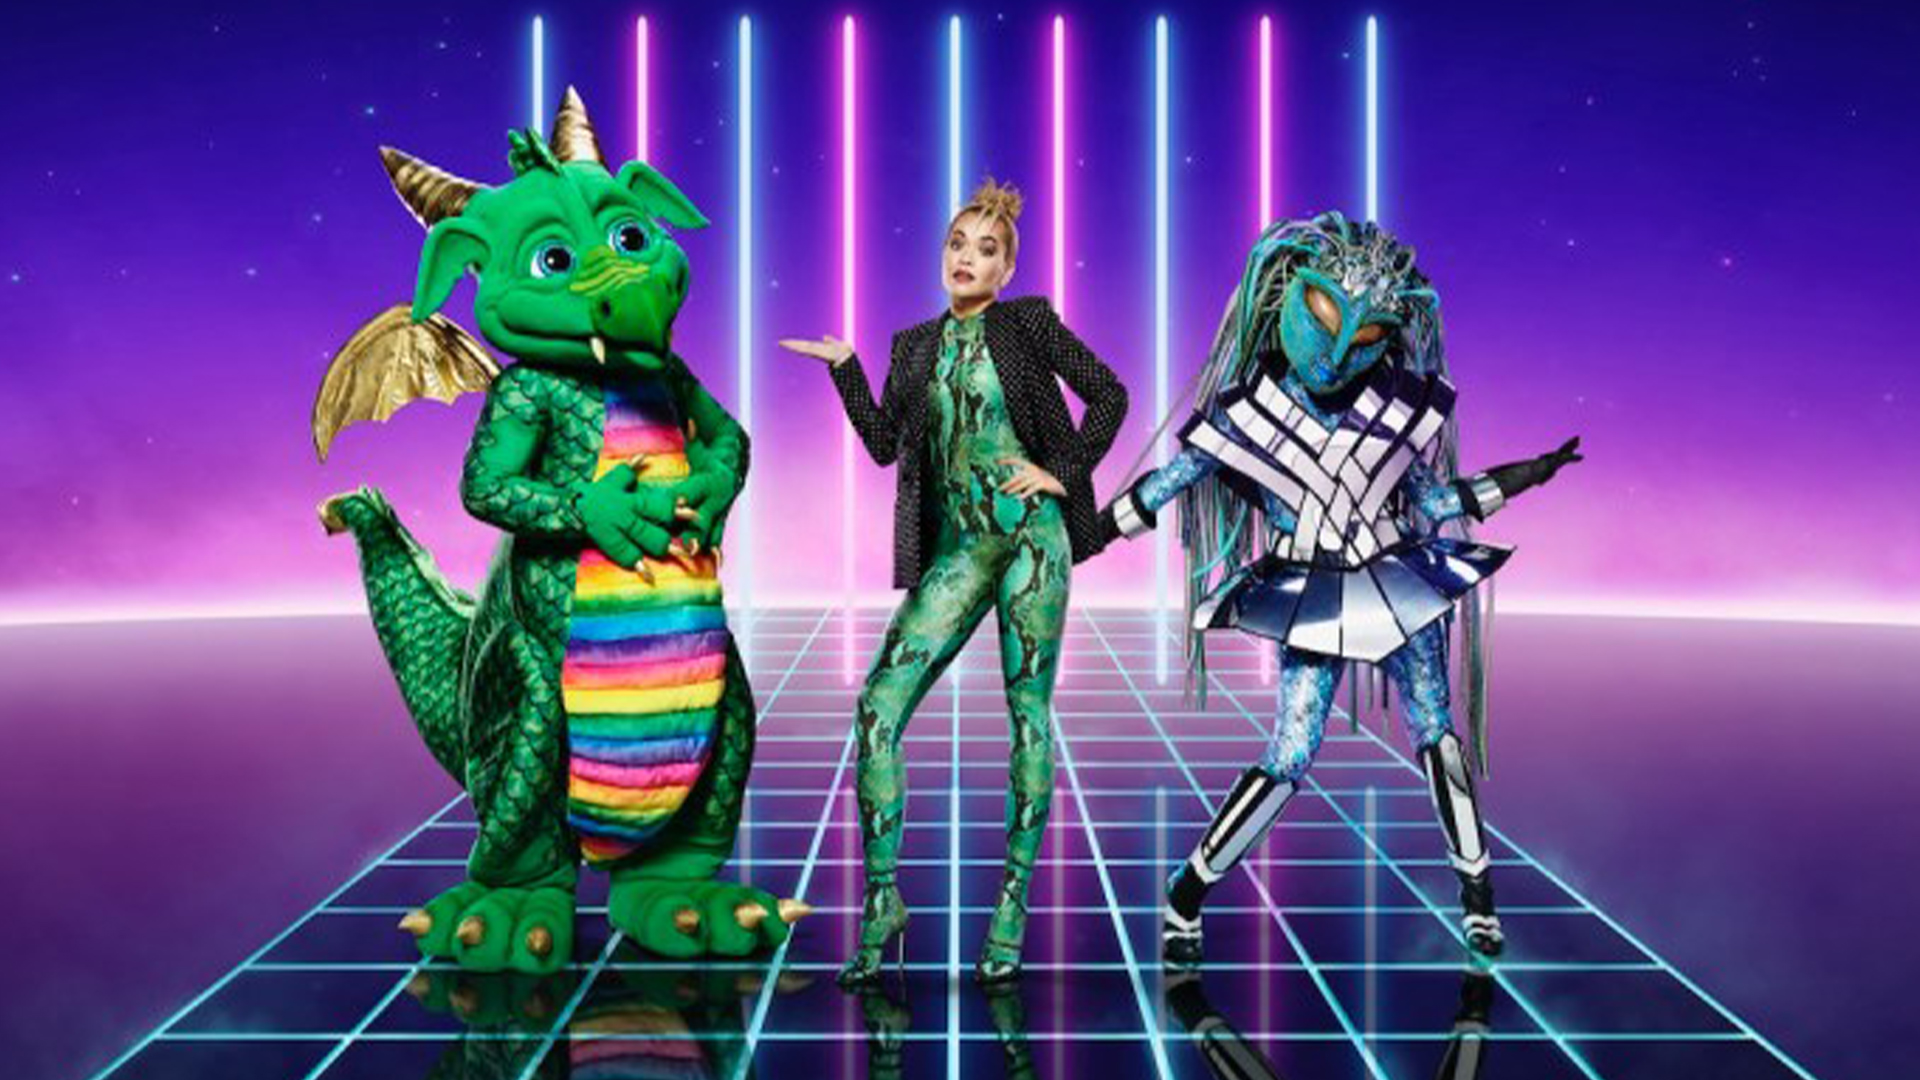 The Masked Singer contestants and Rita Ora